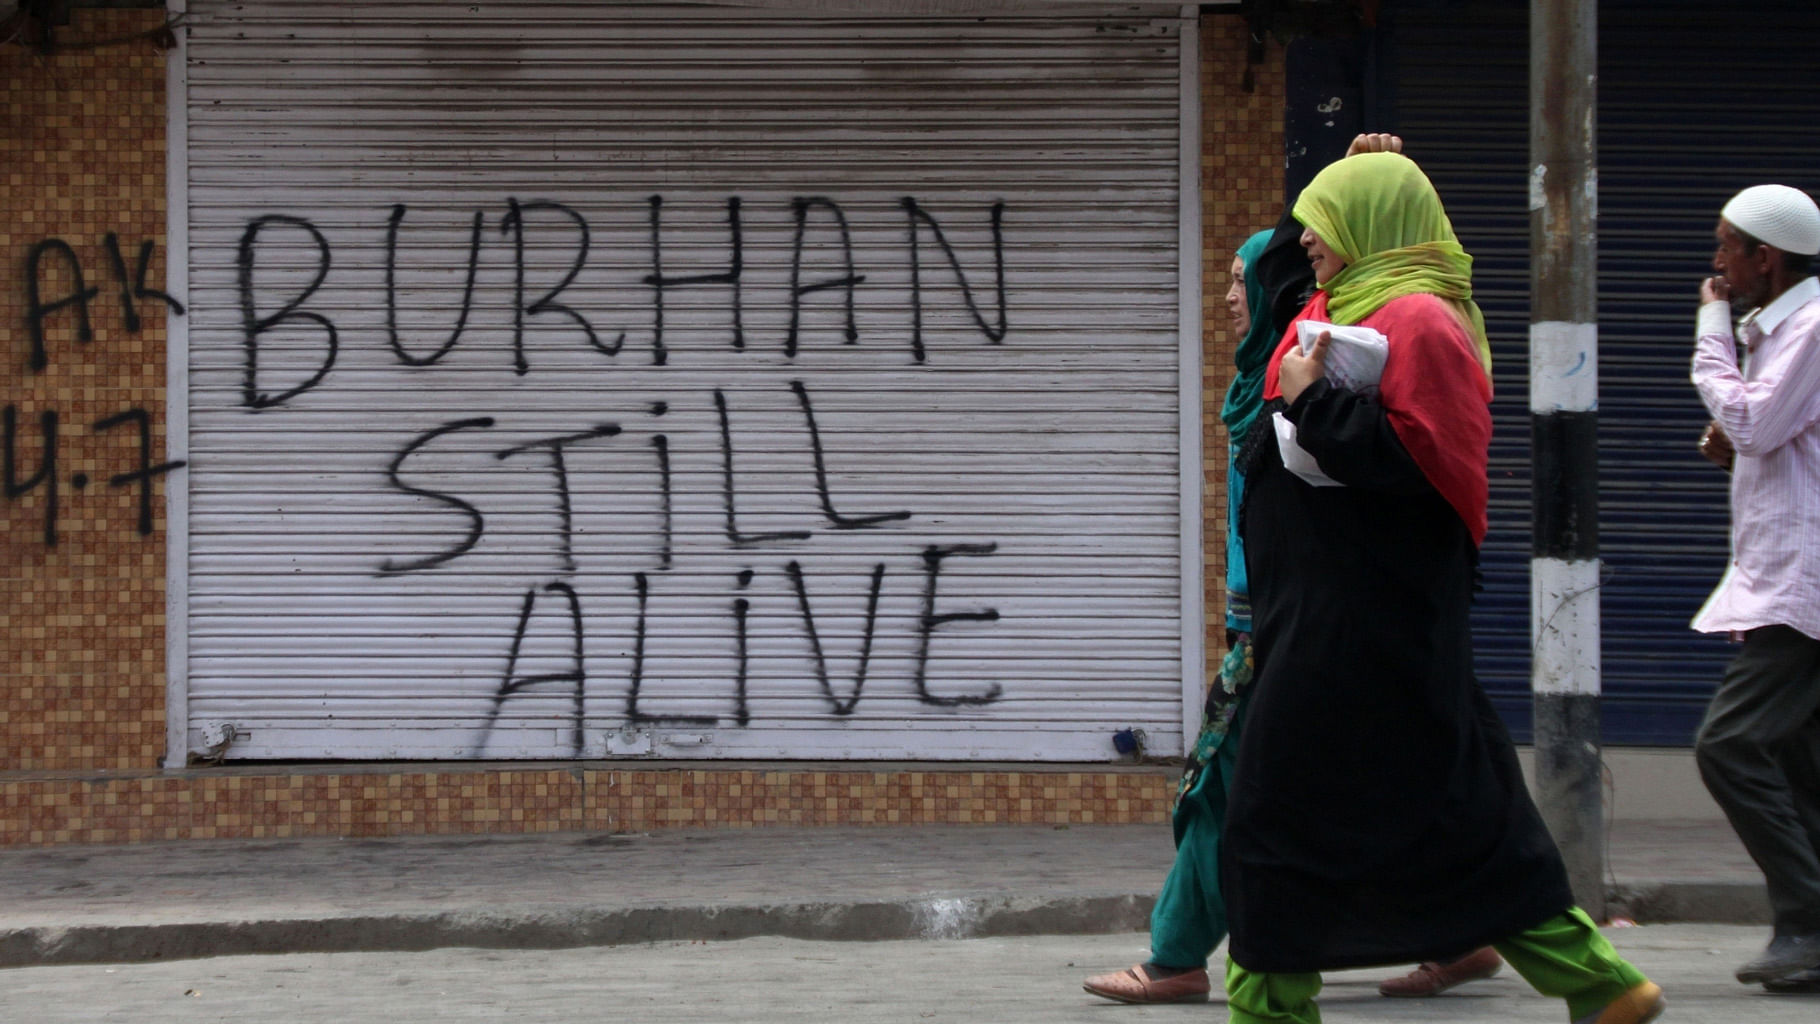 A shop with a graffiti in honour of Burhan Wani, a senior militant commander who was killed in clashes with police and paramilitary forces last week in Srinagar. (Photo: IANS)